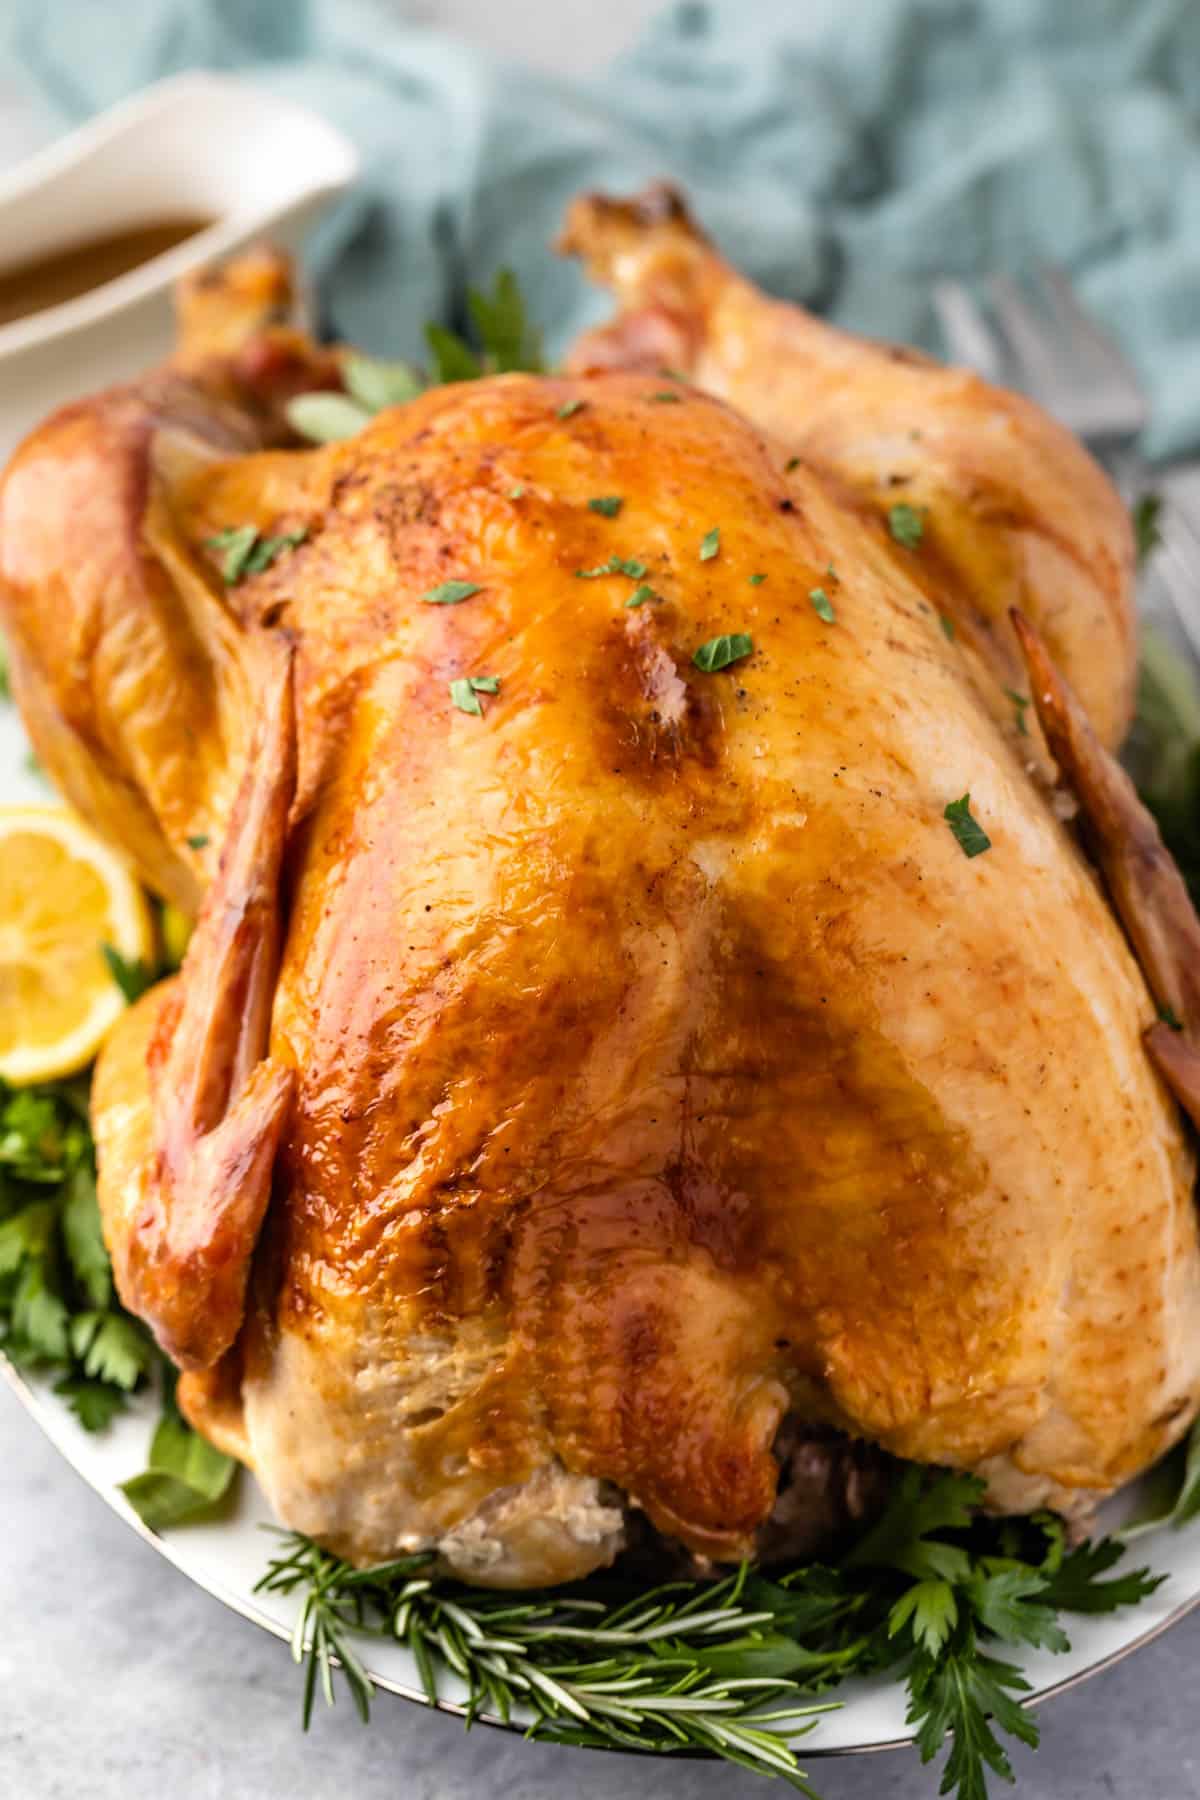 How To Cook A Turkey In A Bag: 1 Simple Hack To Avoid A Dry Turkey